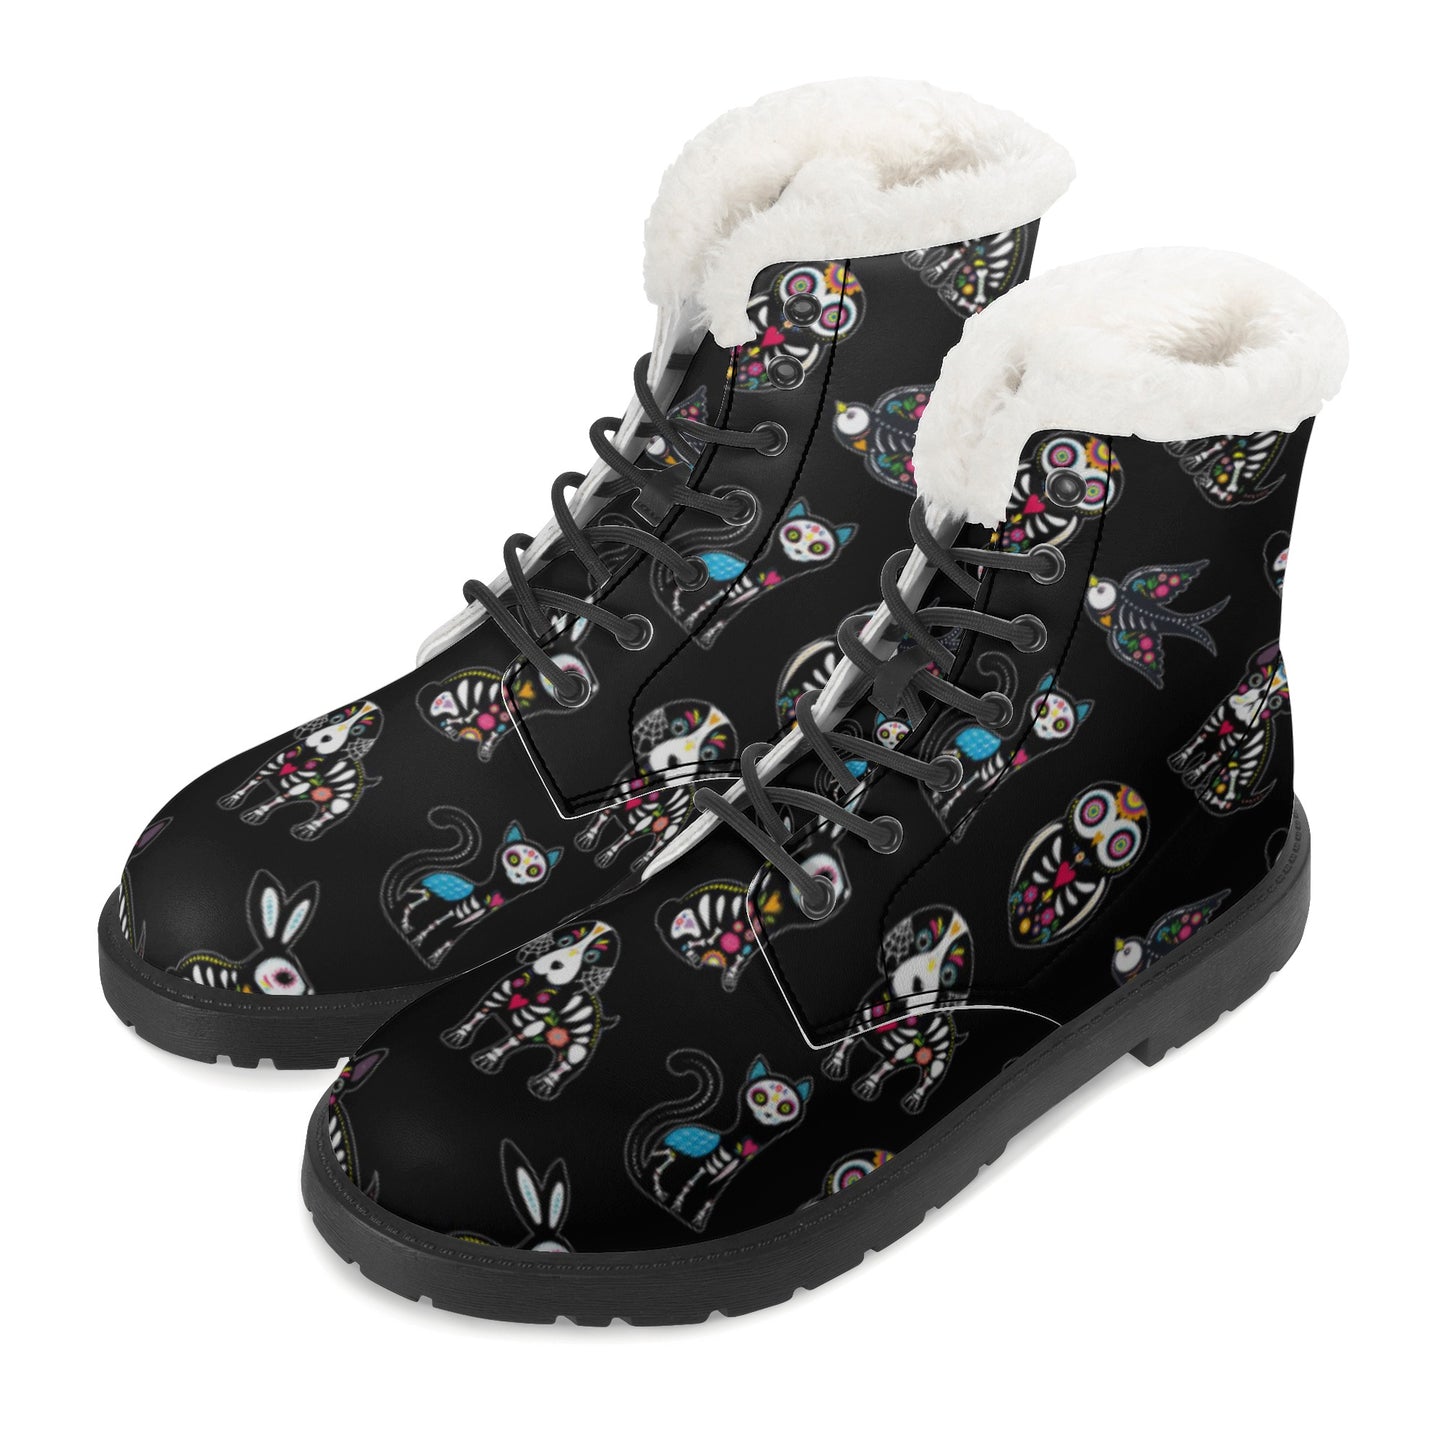 Sugar skull Calaveras skeleton Day of the dead Women's Faux Fur Leather Boots